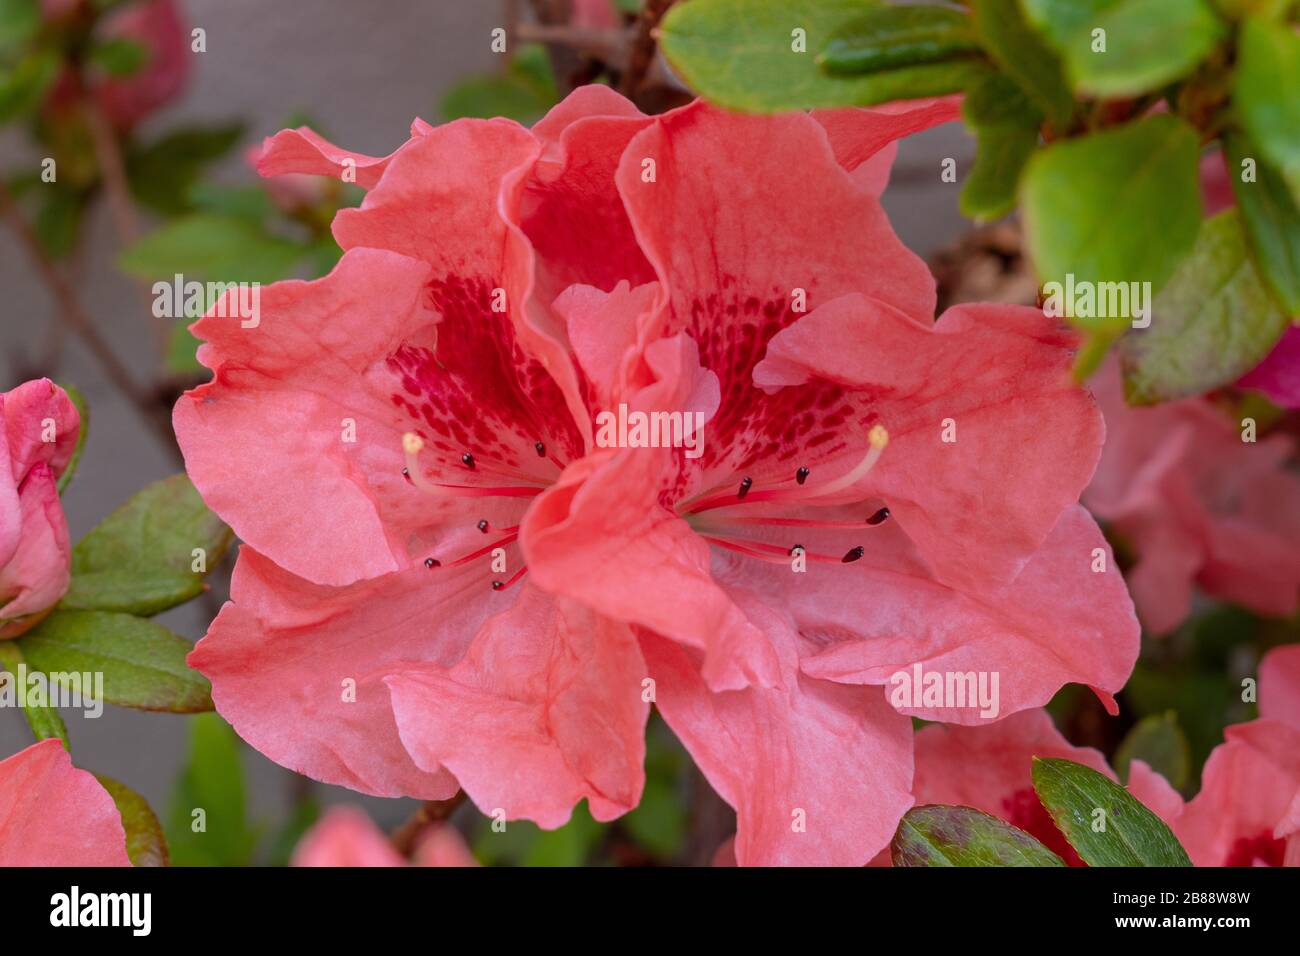 Azalea (Rhododendron) with pink salmon flowers detail Stock Photo